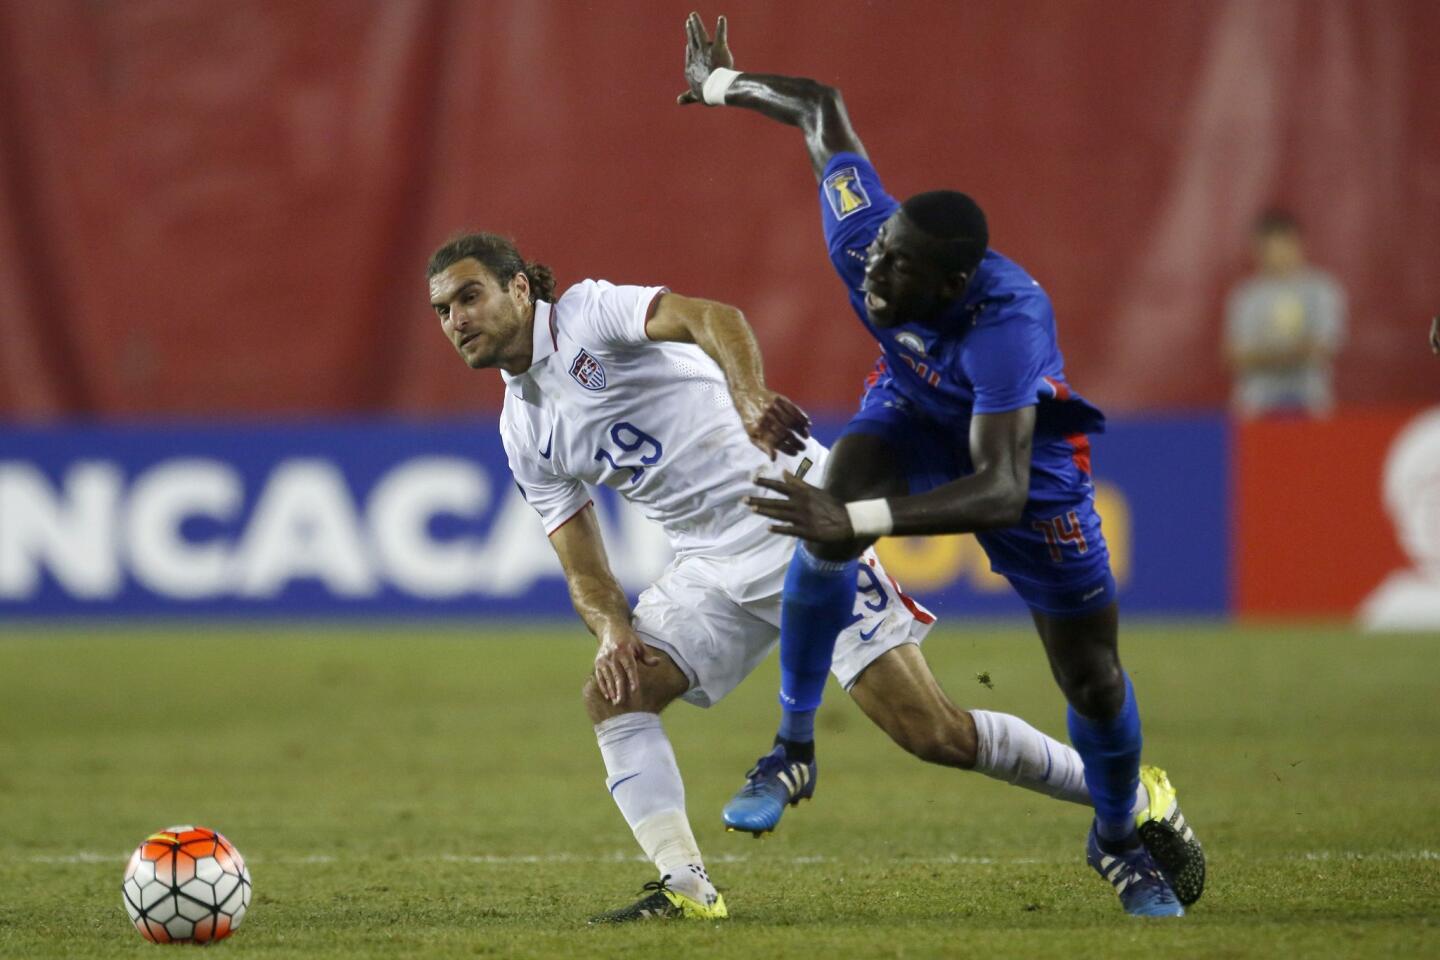 United States' Graham Zusi (19) battles Haiti's James Marcelin (14) during the CONCACAF Gold Cup match between the United States and Haiti, July 10, 2015, in Foxborough, Massachusetts.